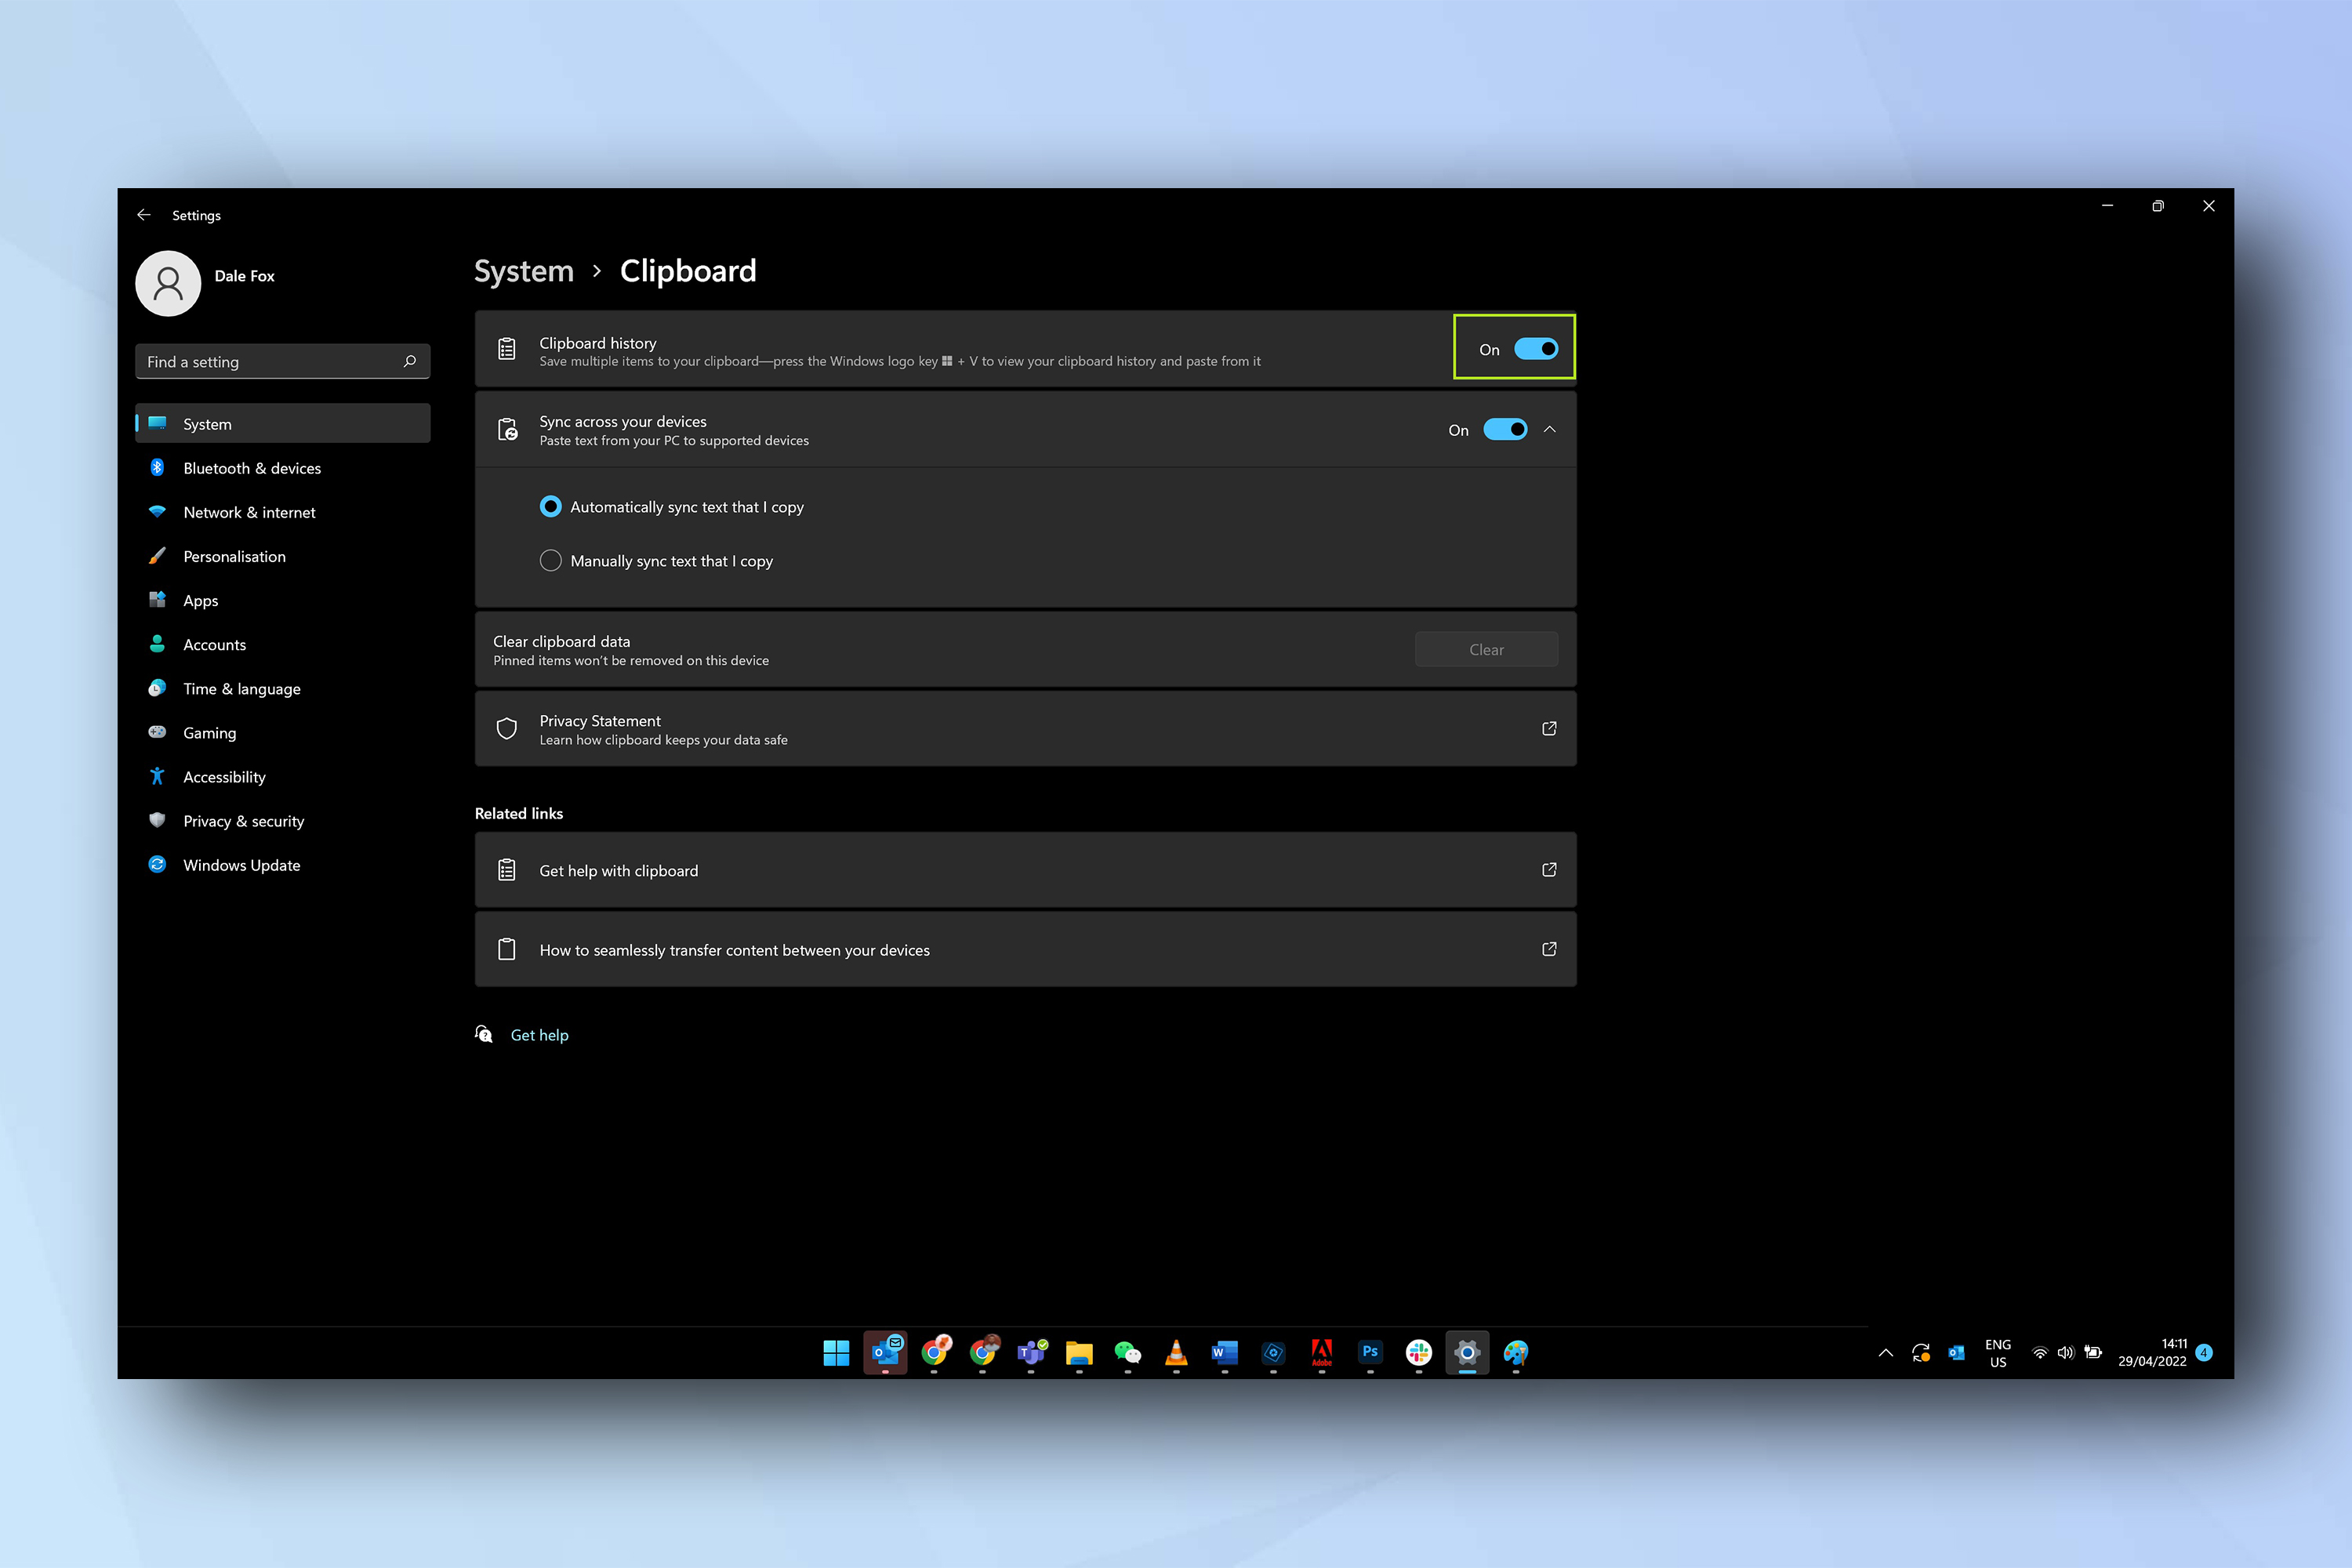 Windows 11 clipboard settings menu, showing how to enable clipboard history in Windows